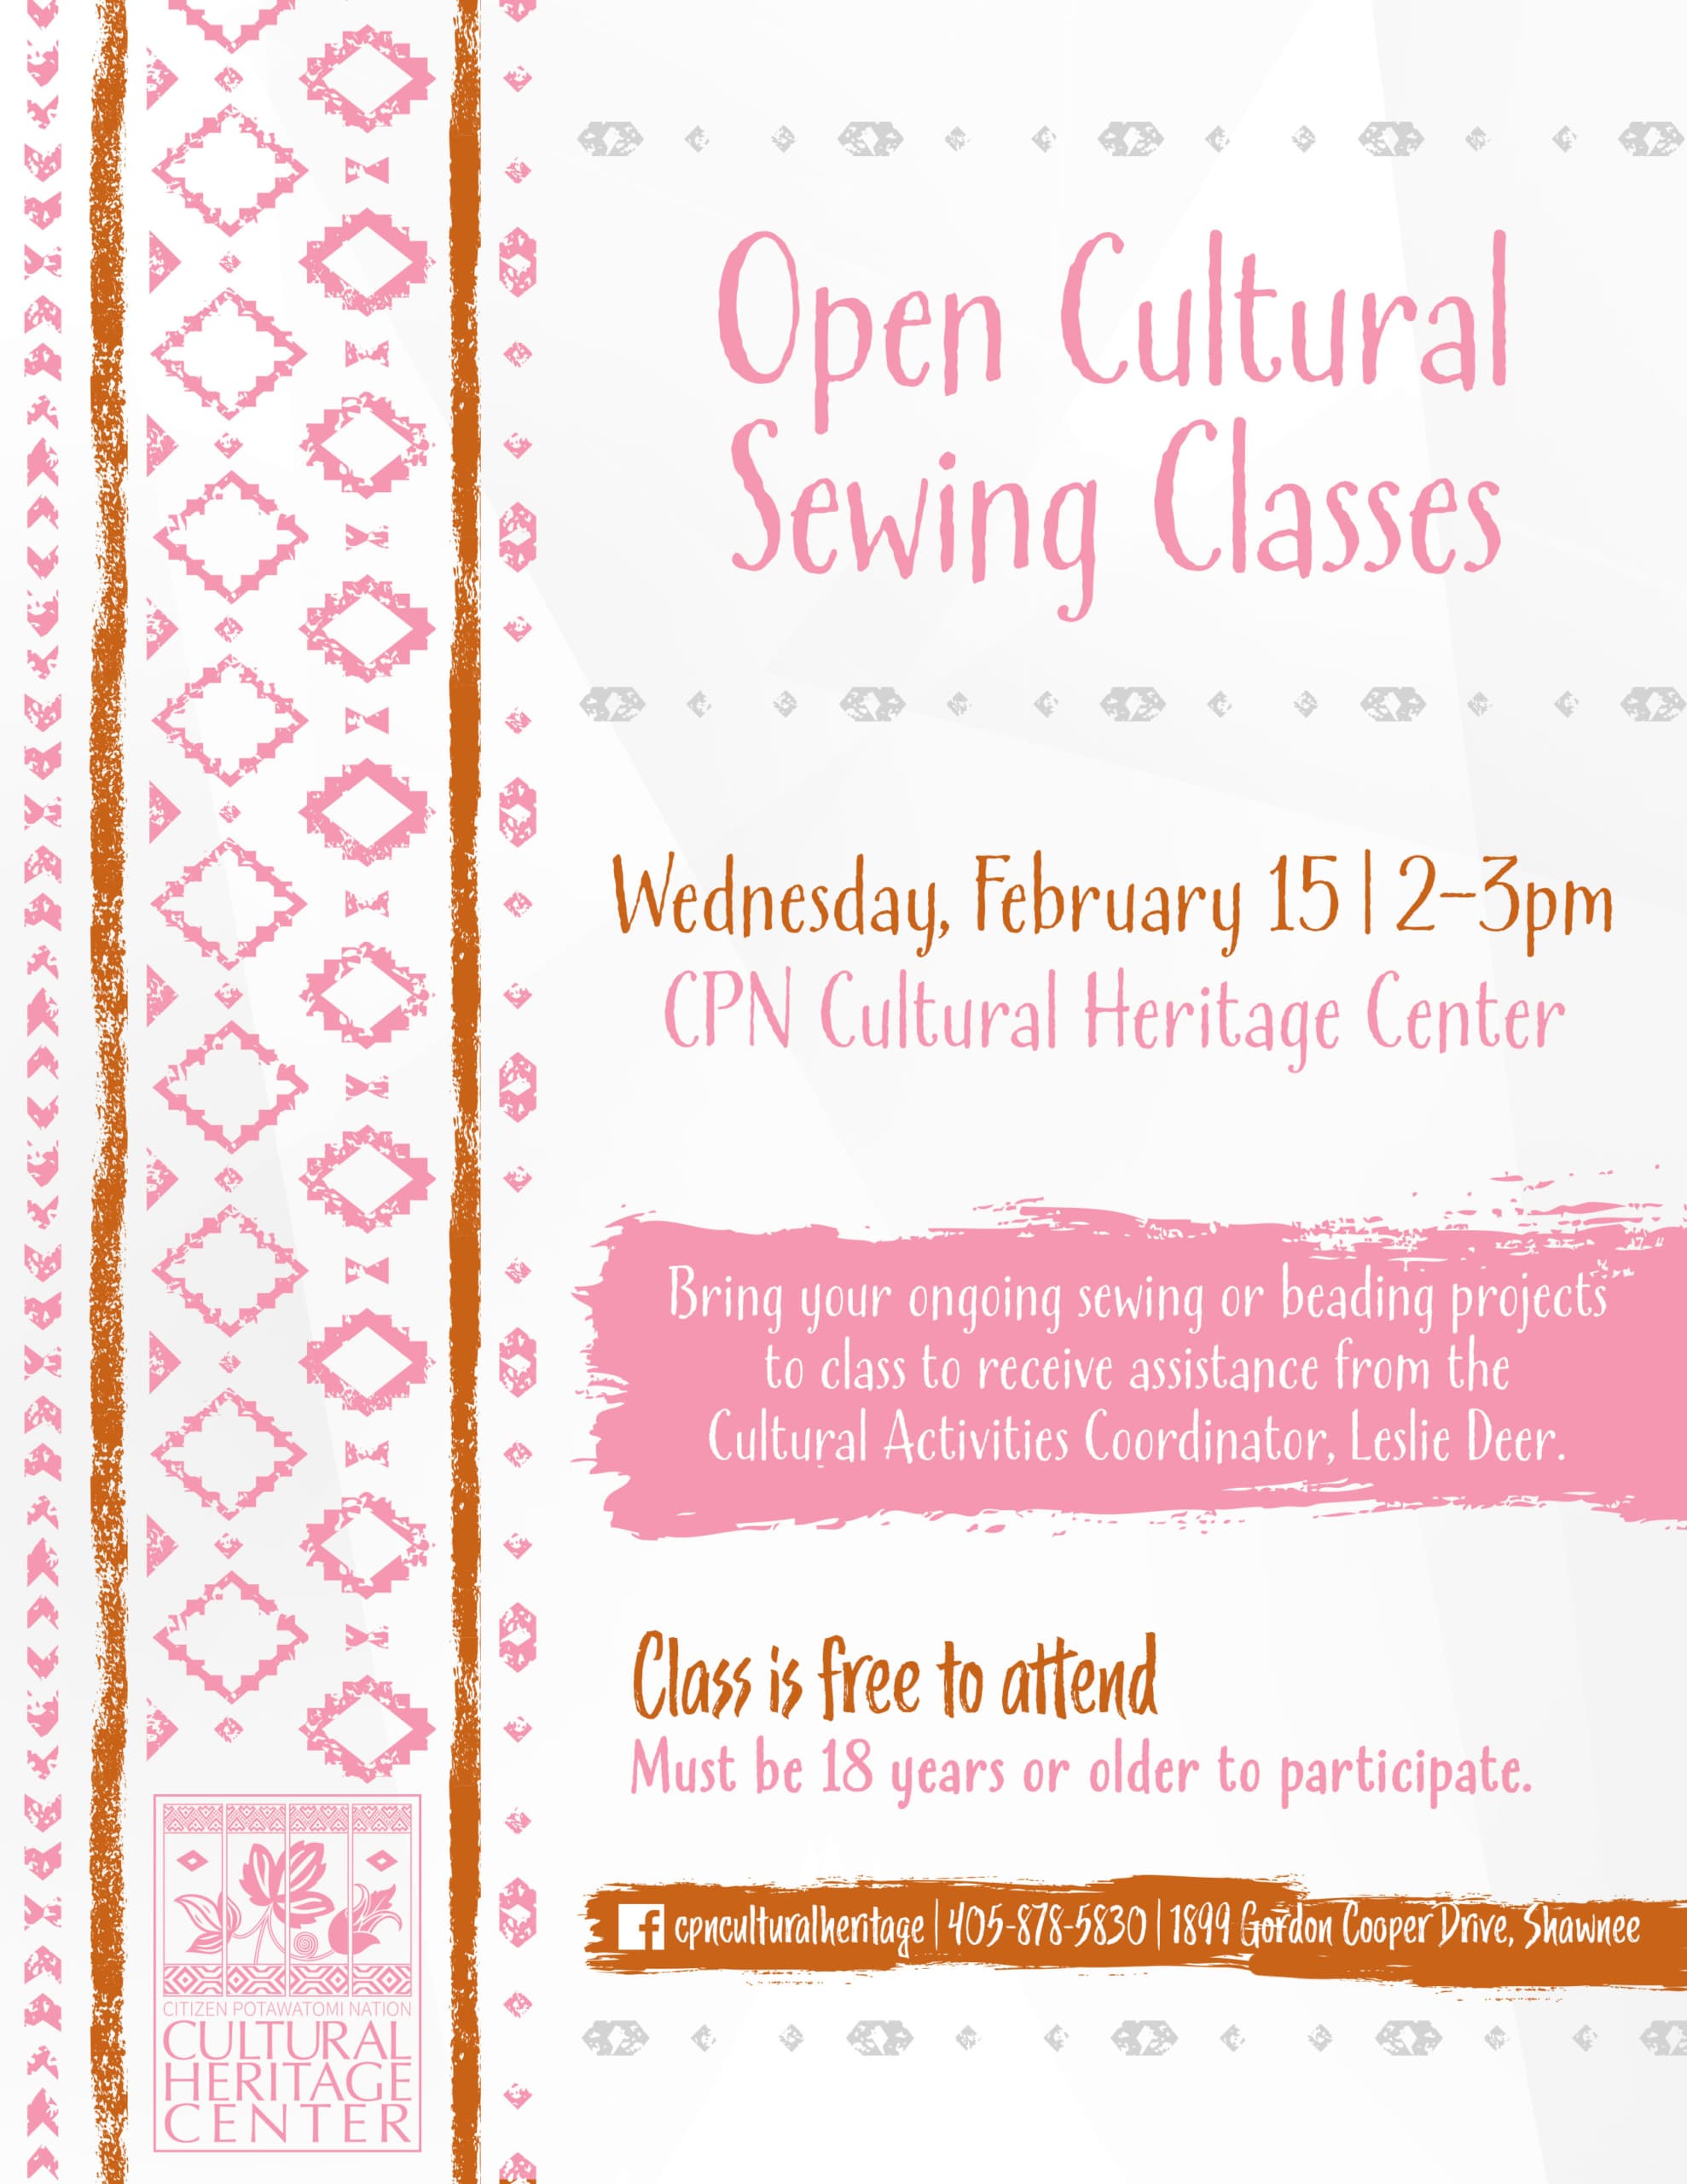 Pink and orange geometric designs frame an invitation to bring ongoing sewing or beading projects to open cultural sewing classes to receive assistance from the Cultural Activities Coordinator, Leslie Deer. Class is free to attend. Participants must be 18 years or older. 